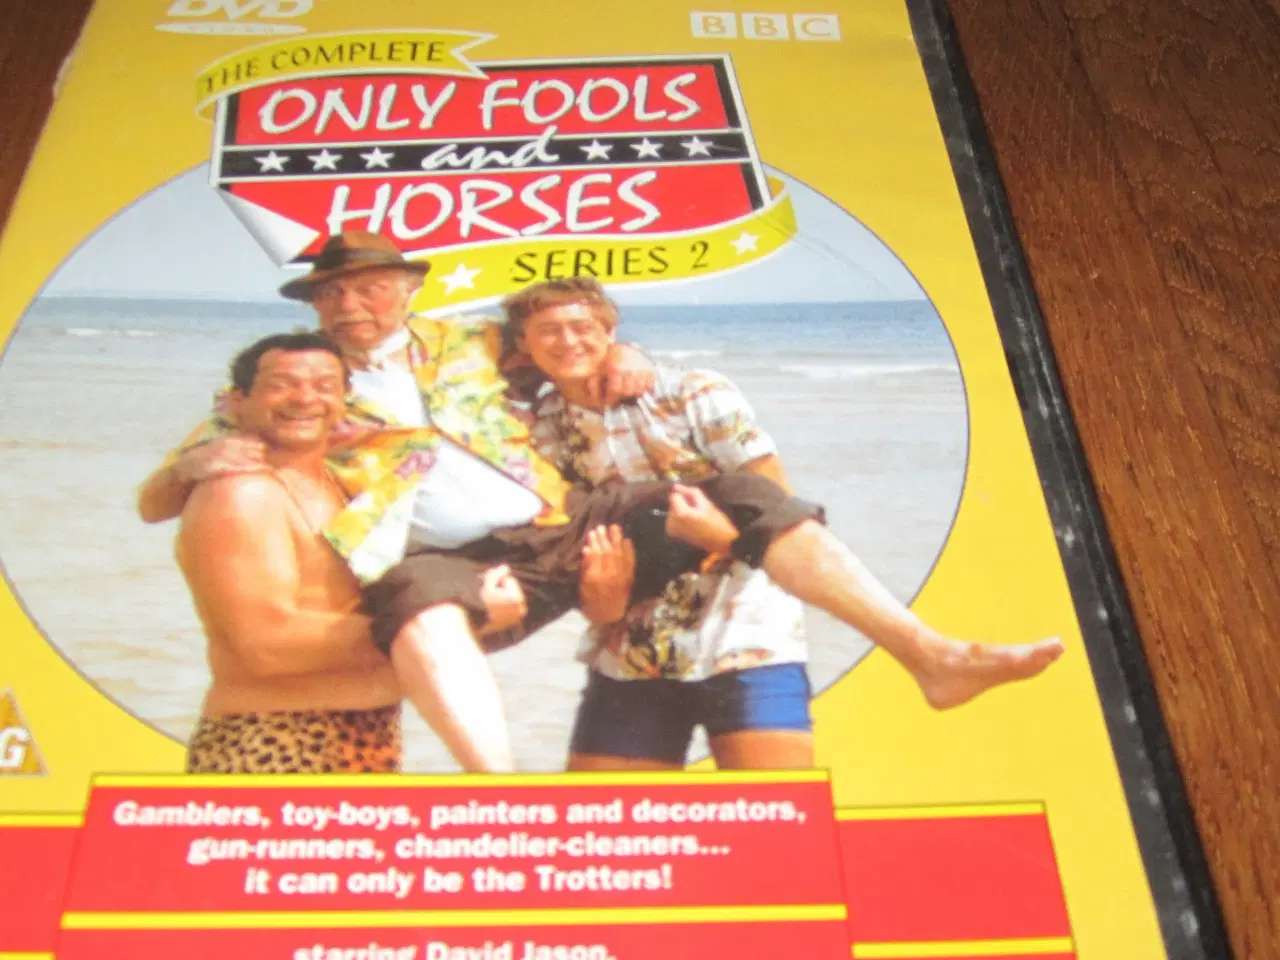 Billede 1 - ONLY FOOLS and HORSES. Series 2.